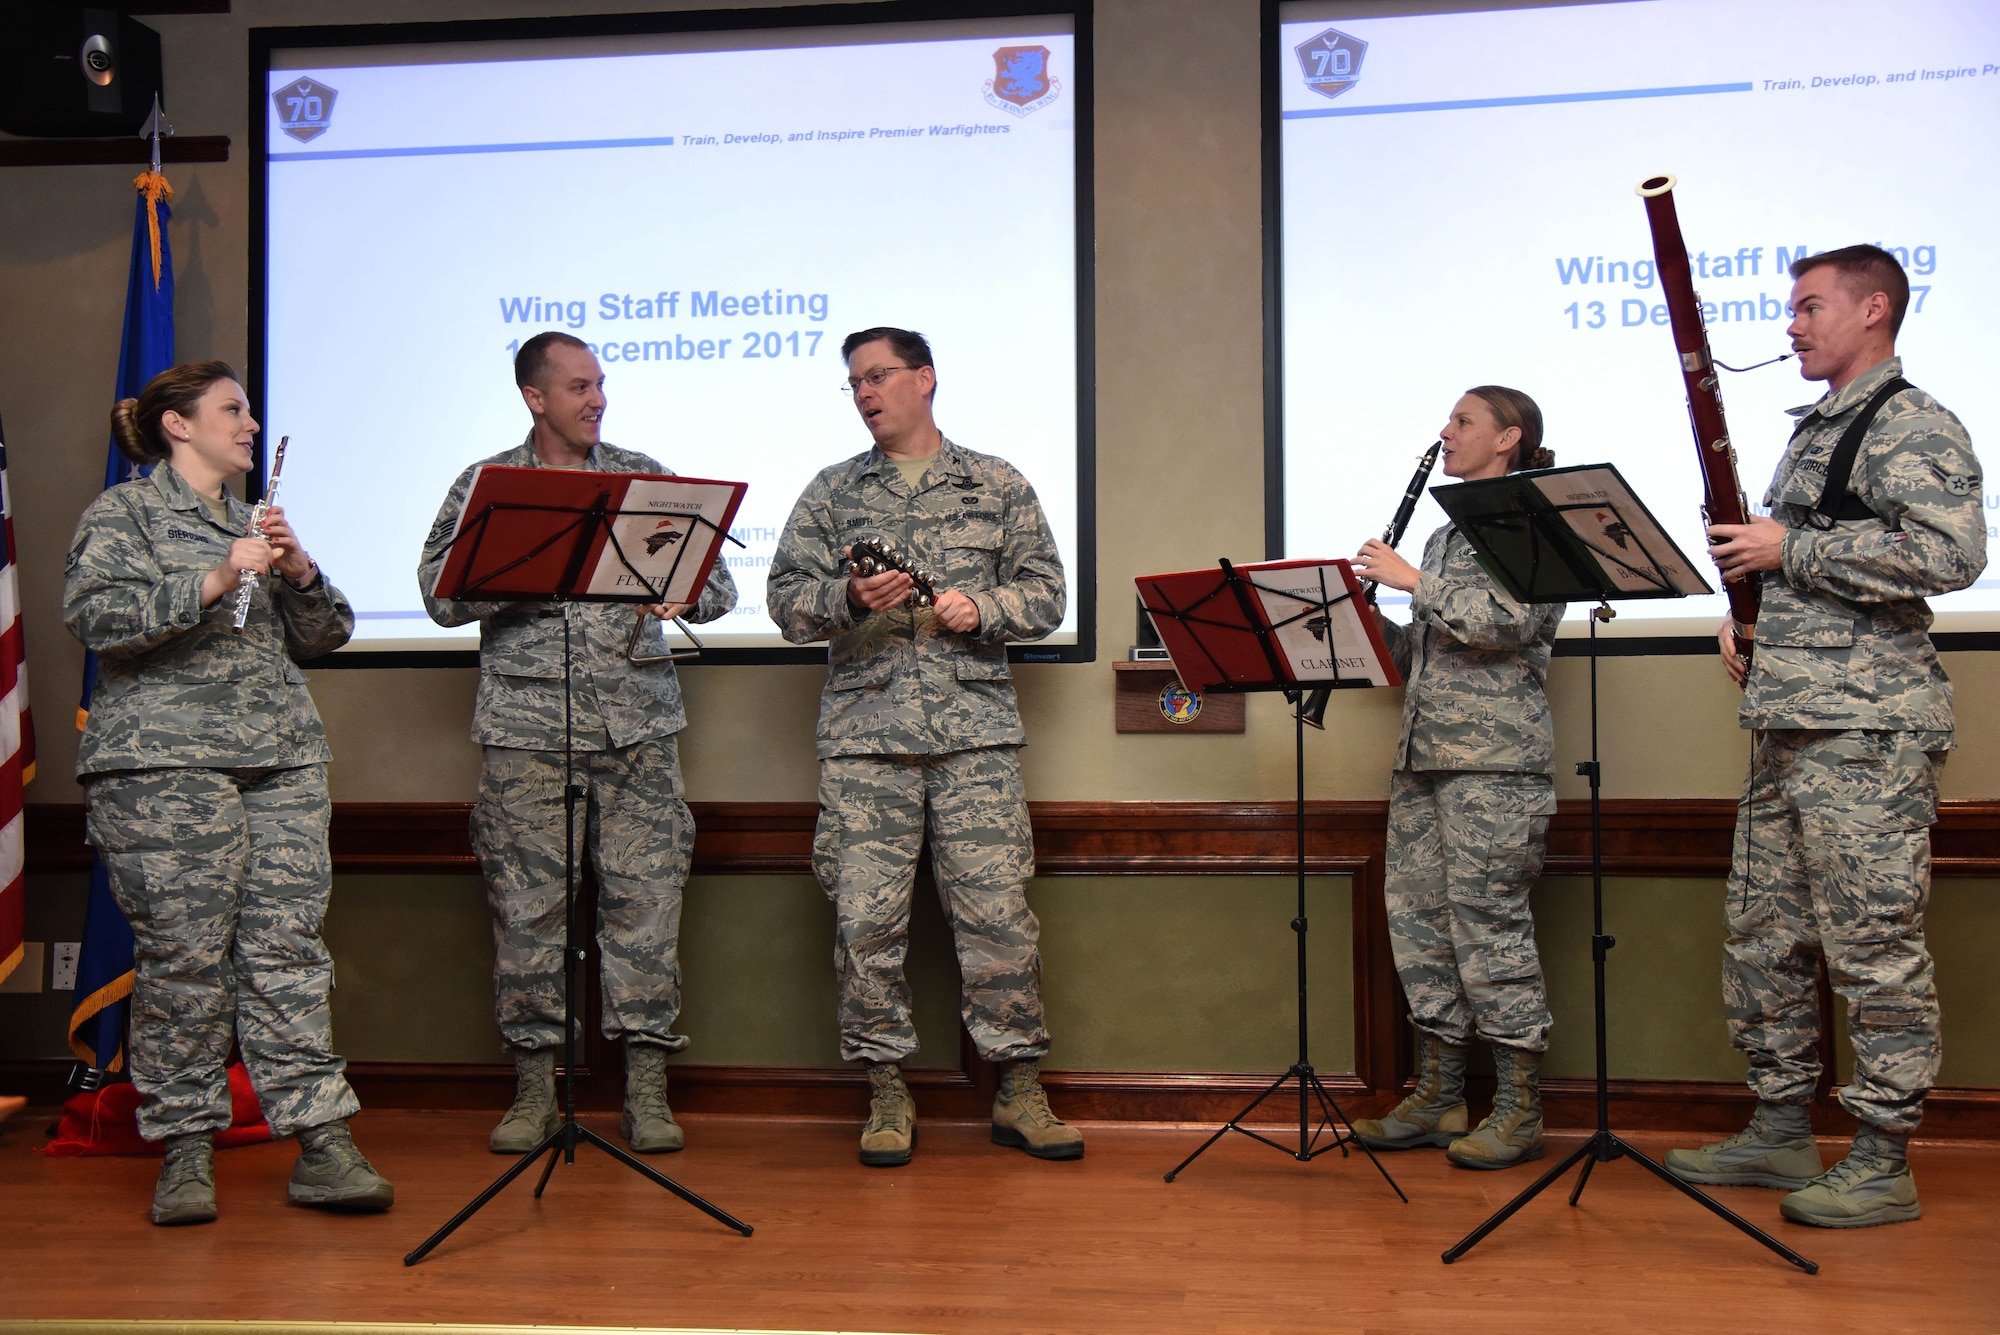 Col. C. Mike Smith, 81st Training Wing vice commander, performs a song with The U.S. Air Force Band of the West, Nightwatch, during the 81st Training Wing staff meeting at Stennis Hall Dec. 13, 2017, on Keesler Air Force Base, Mississippi. During the two-day visit to Keesler the band performed for Airmen and local residents throughout various locations at Keesler and the nearby area. Their mission is to honor military heritage through music, connect with the American public and inspire patriotism and excellence. (U.S. Air Force photo by Kemberly Groue)